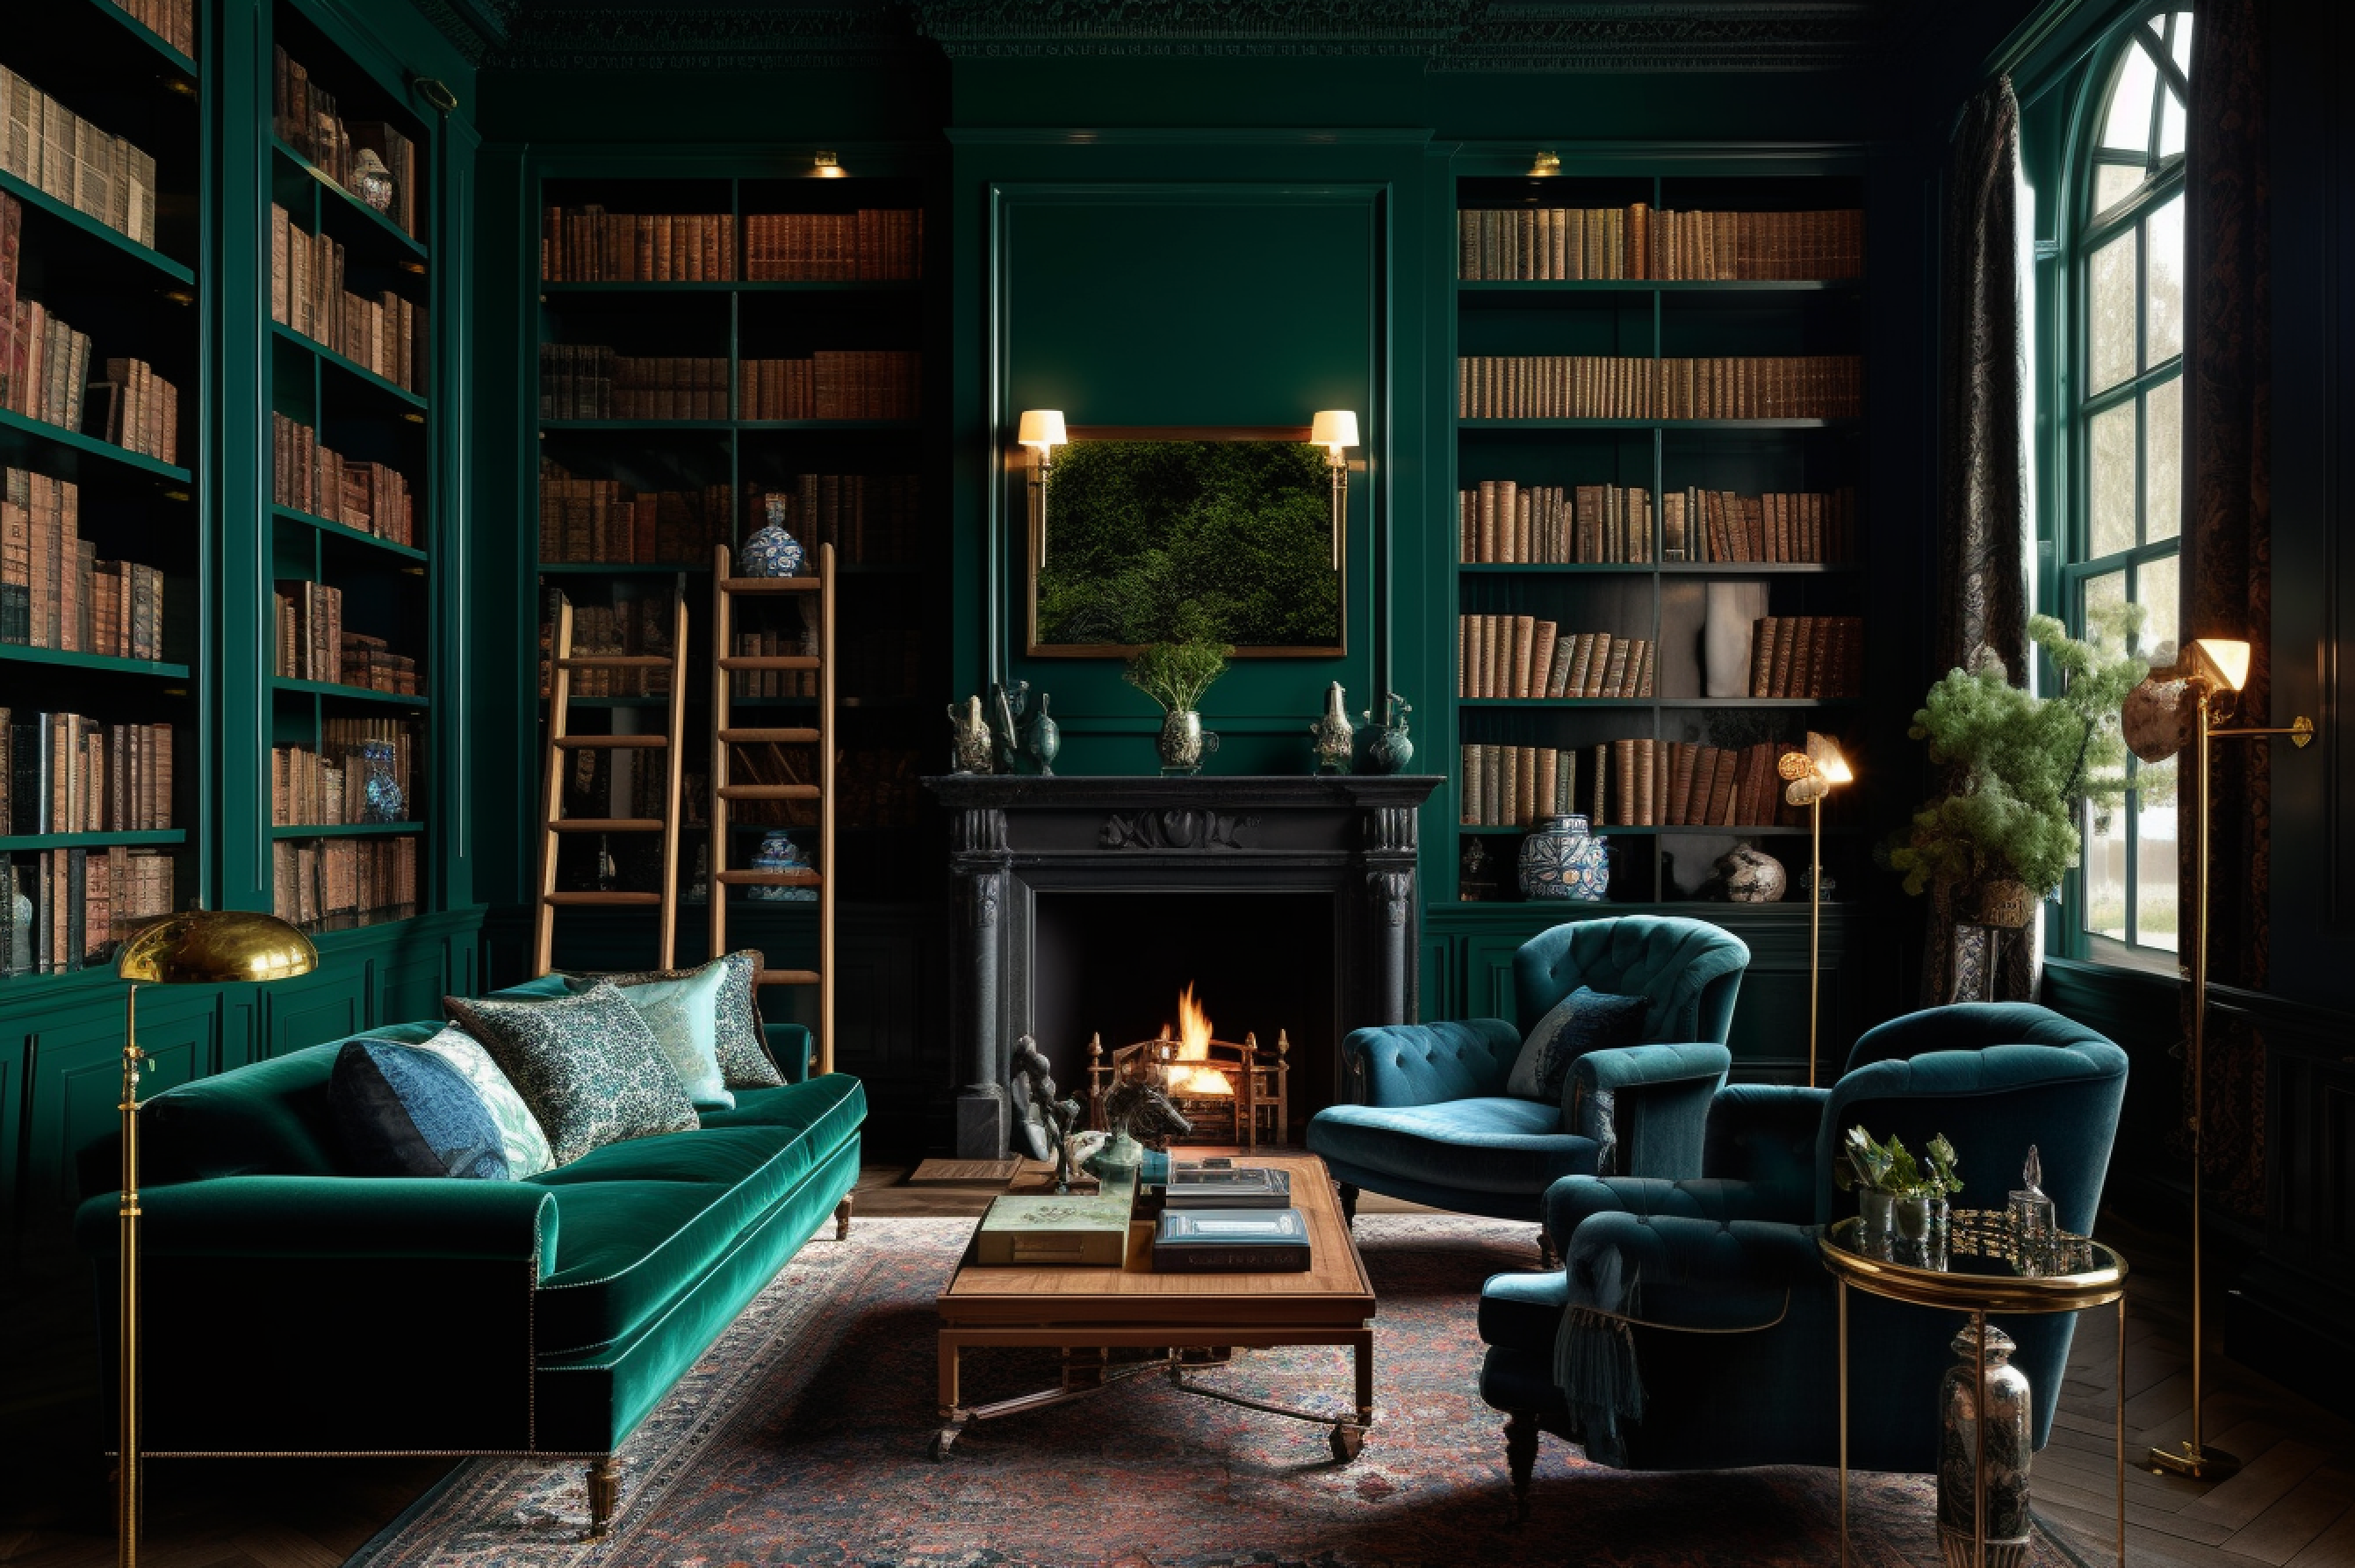 11. Emerald Green and Deep Blue Scheme. A library that feels like a royal reading retreat. Let's dive into the next chapter, shall we?